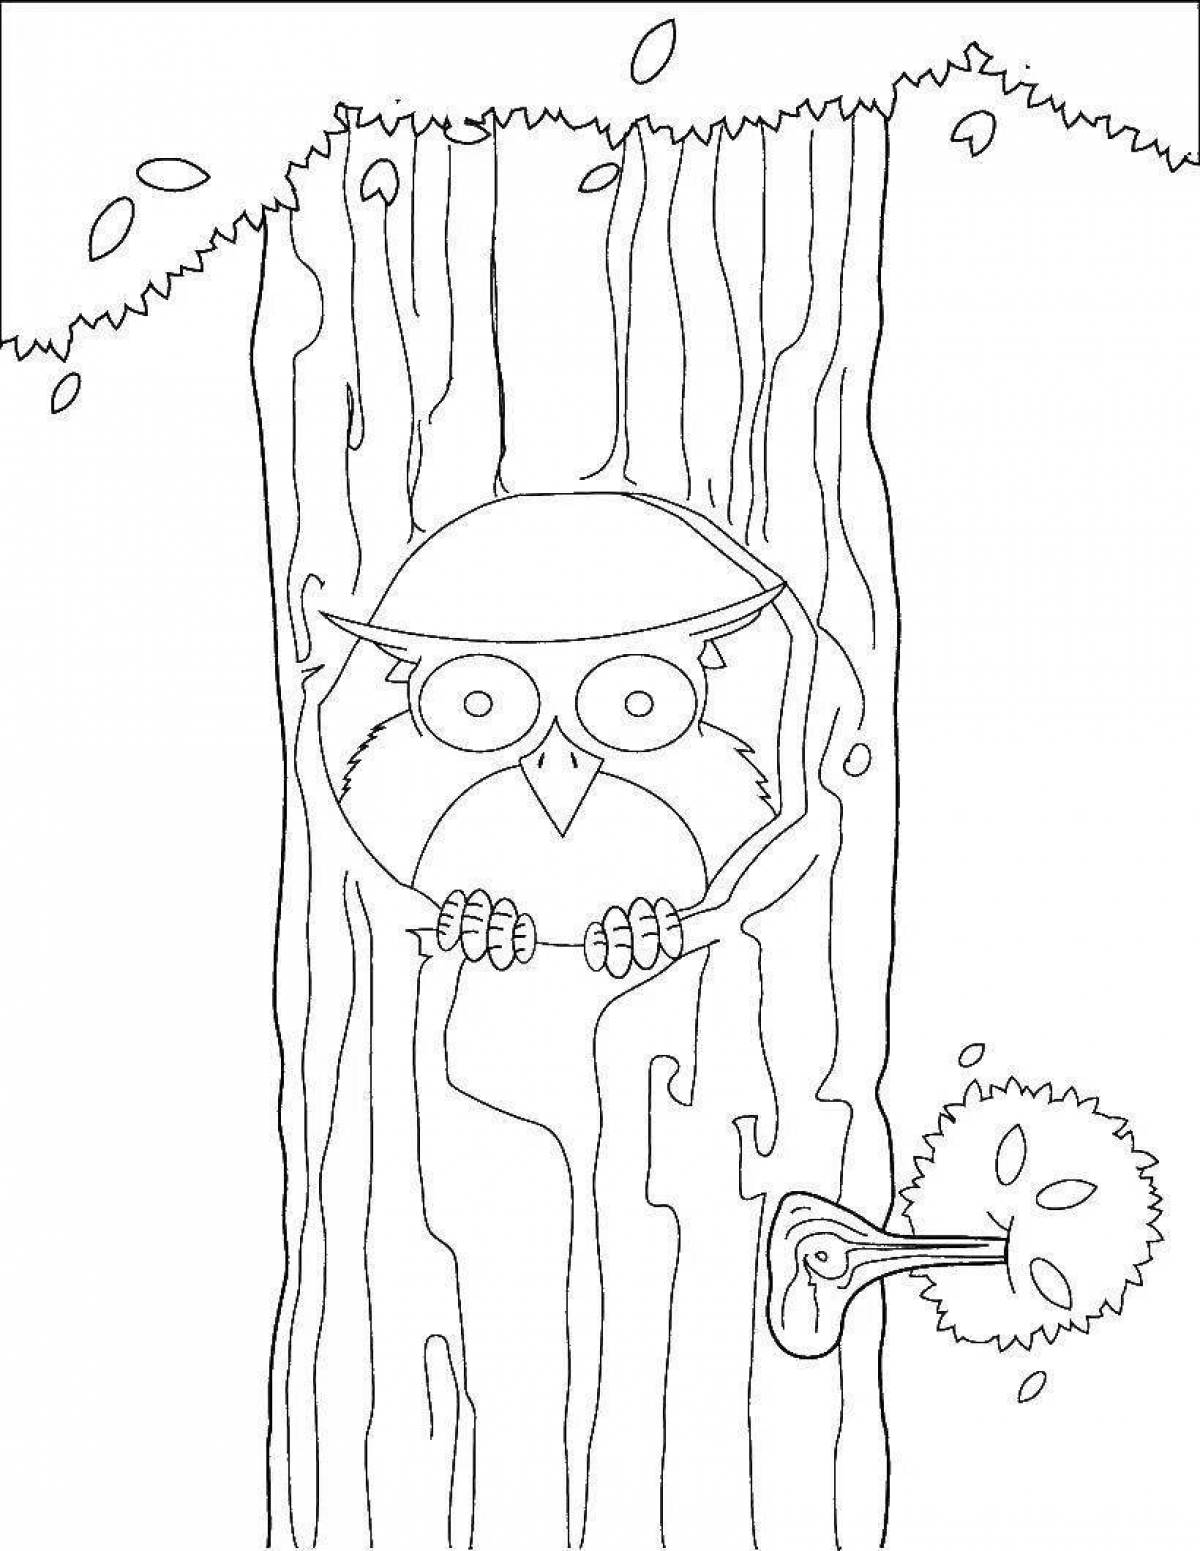 Bianca owl shining coloring page